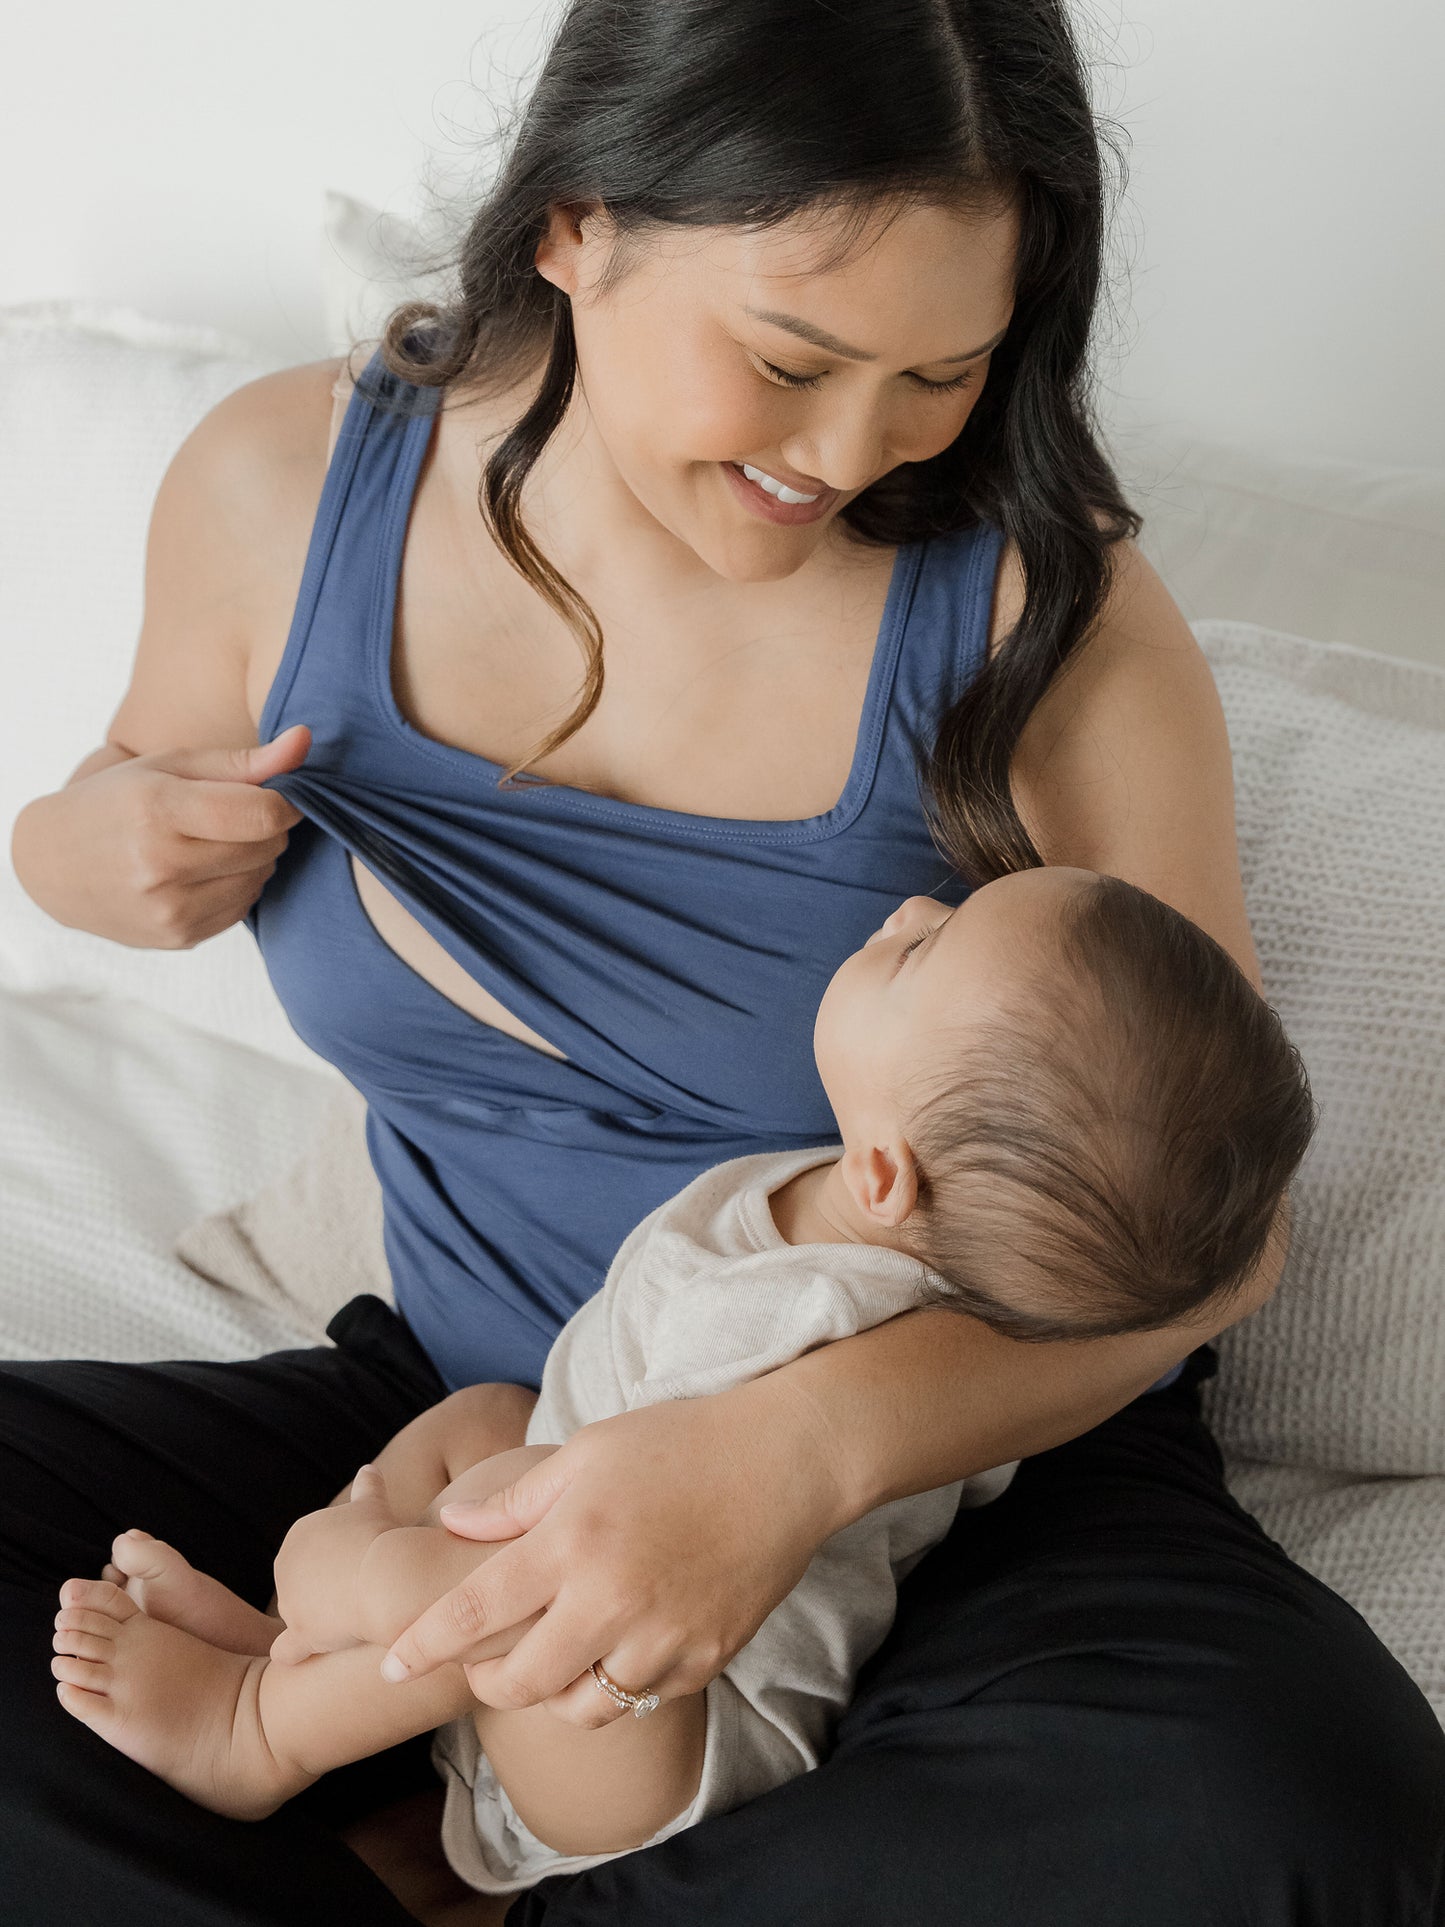 Model holding her baby in her lap while wearing the Everyday Essential Nursing Tank in Slate Blue showing the easy pull up nursing access.